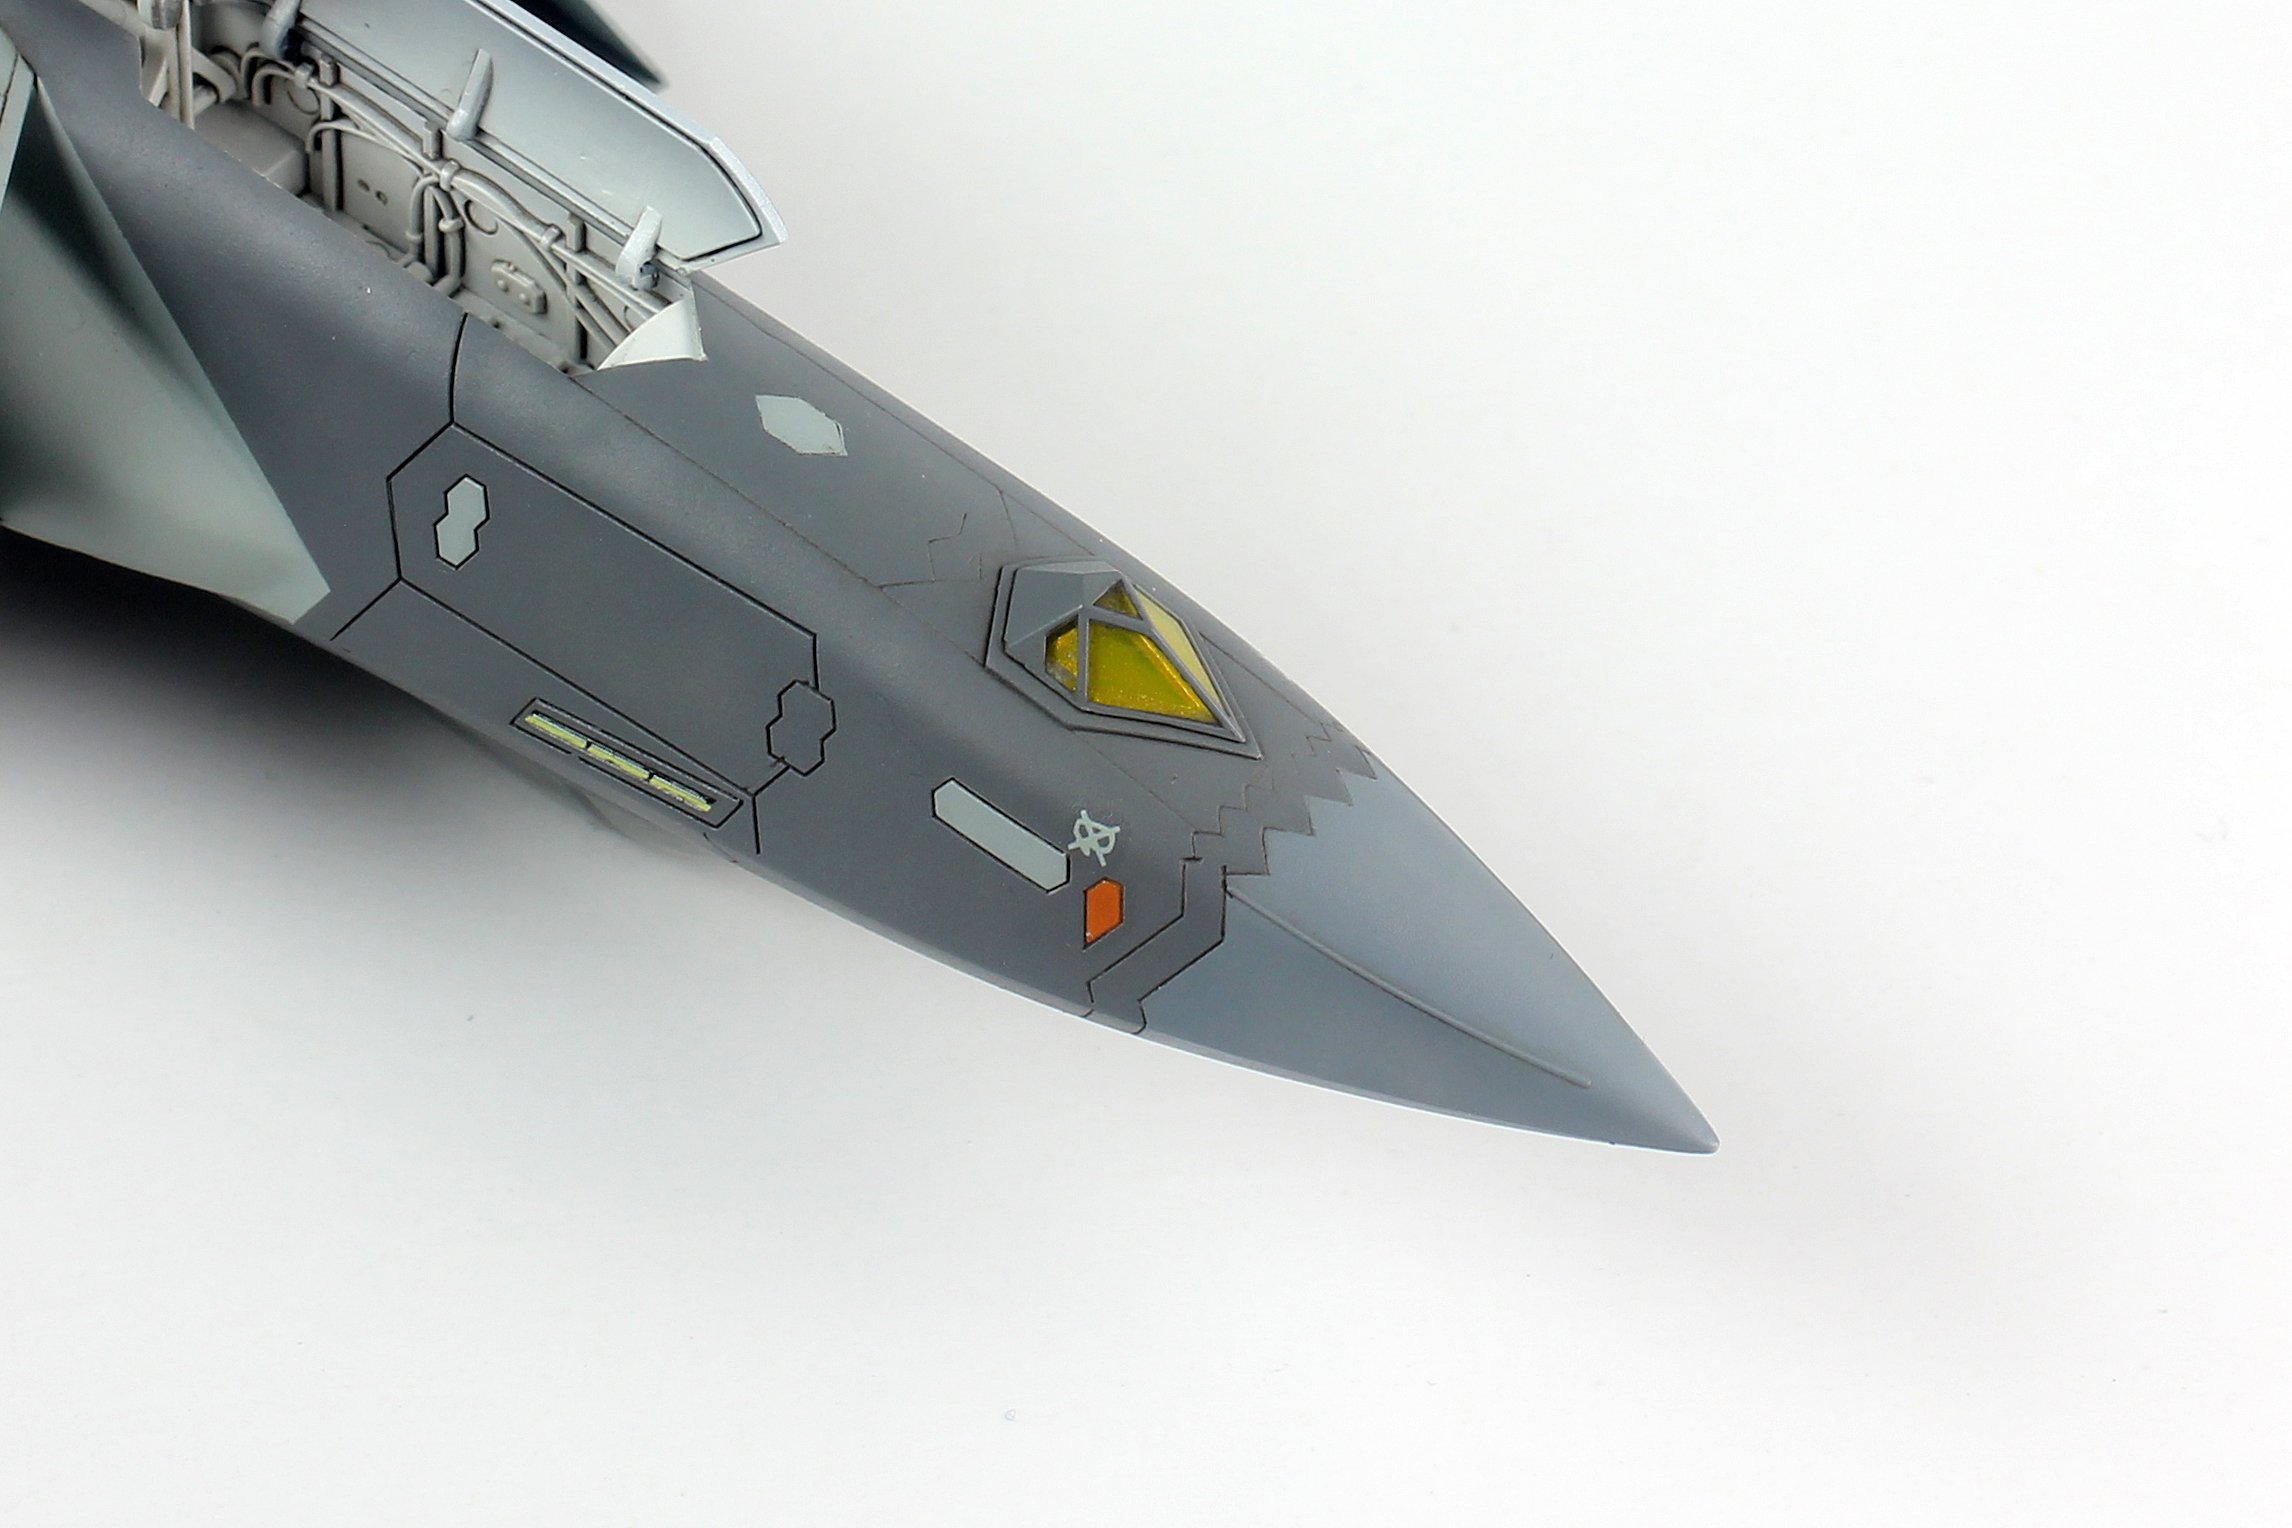 1/72 Chinese J-20 "Mighty Dragon" Beast Model - Click Image to Close